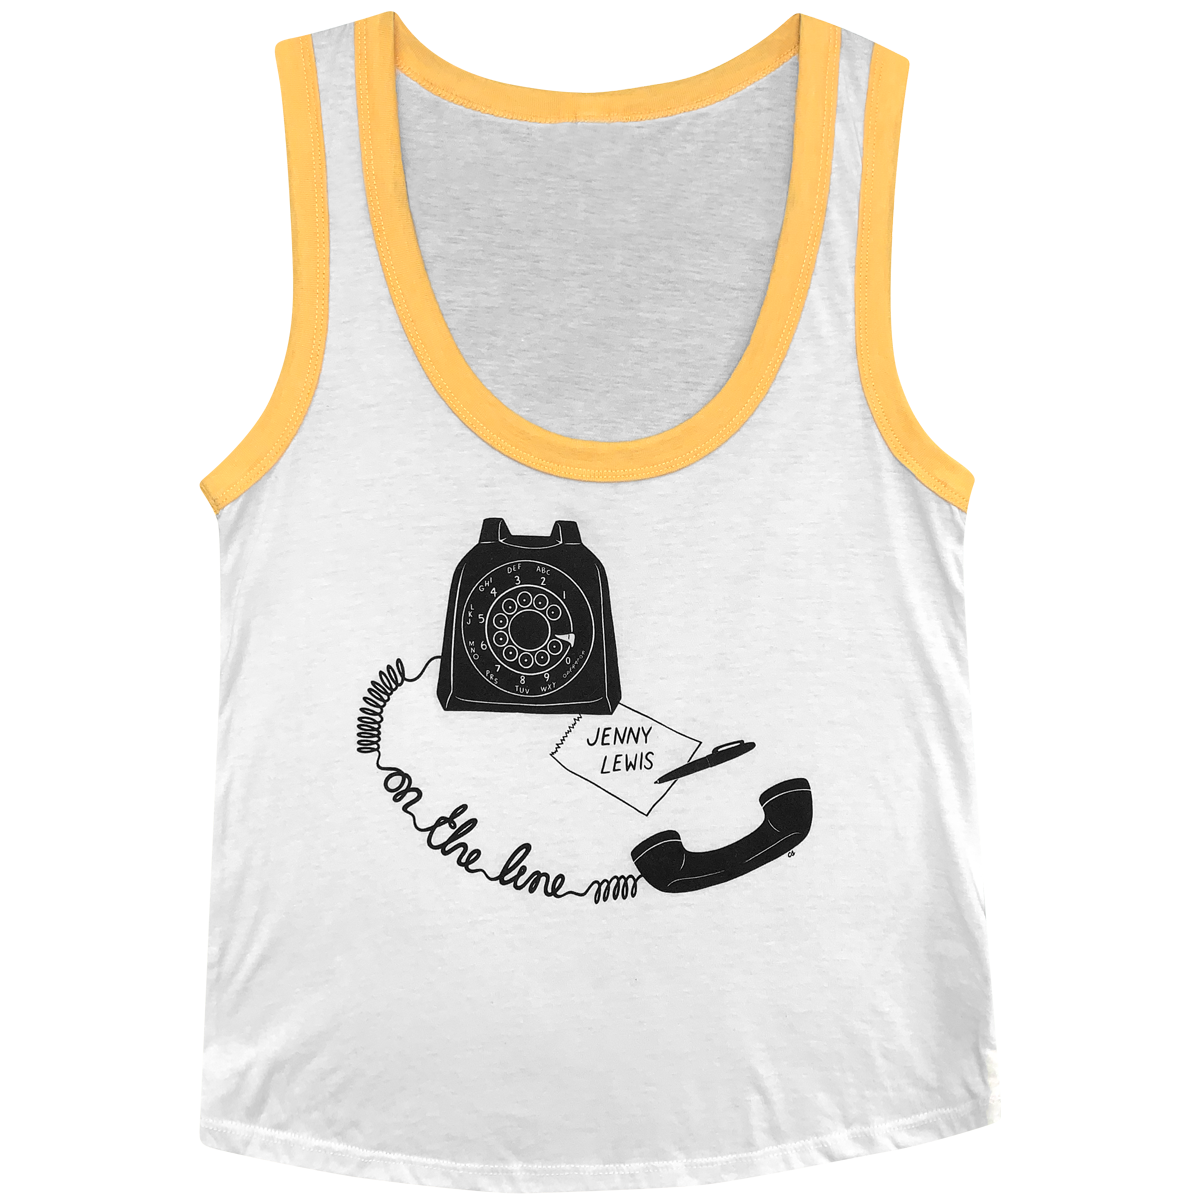 On The Line Camp Tank